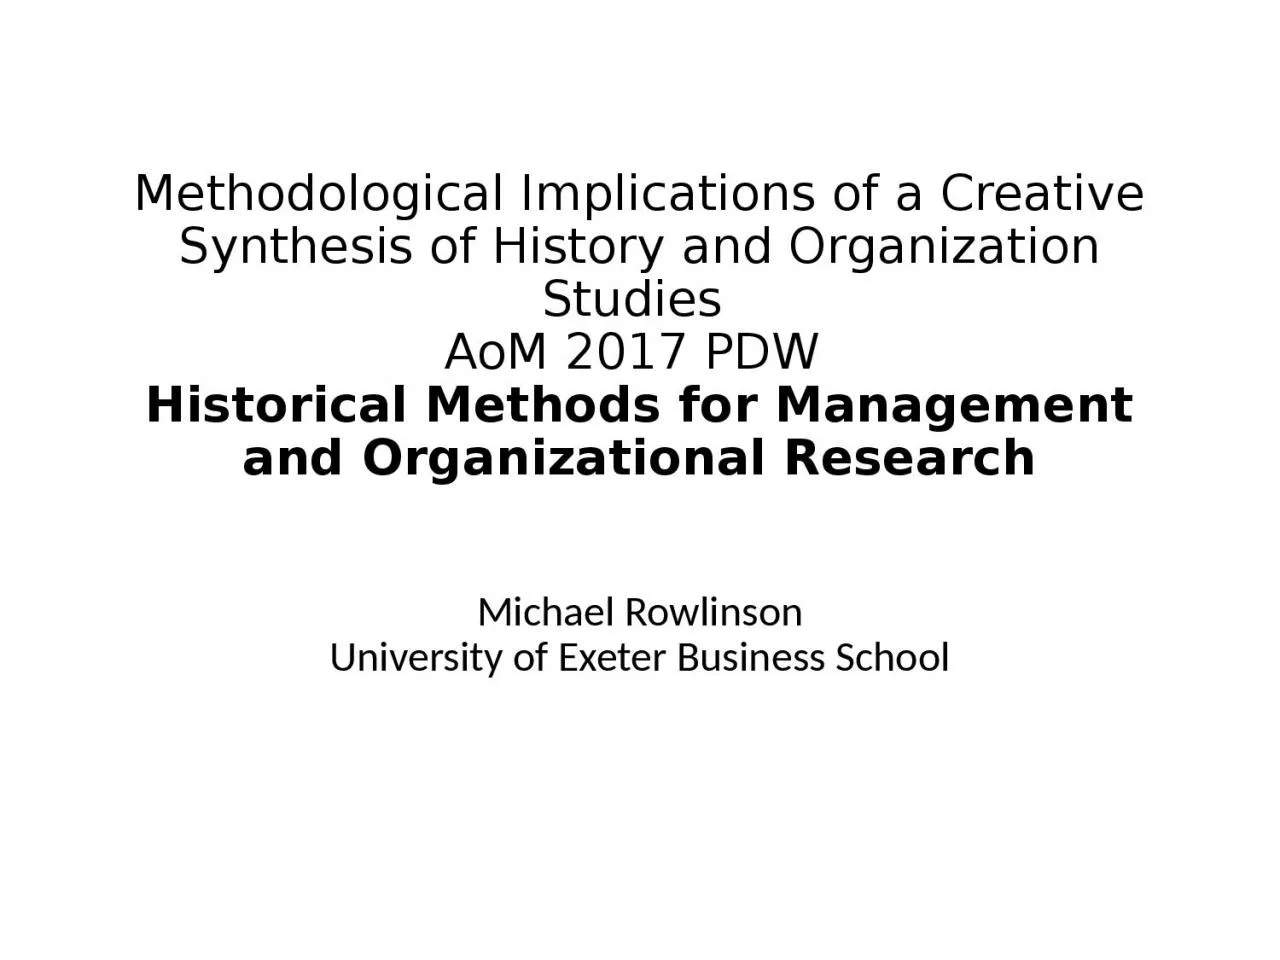 Methodological Implications of a Creative Synthesis of History and Organization Studies